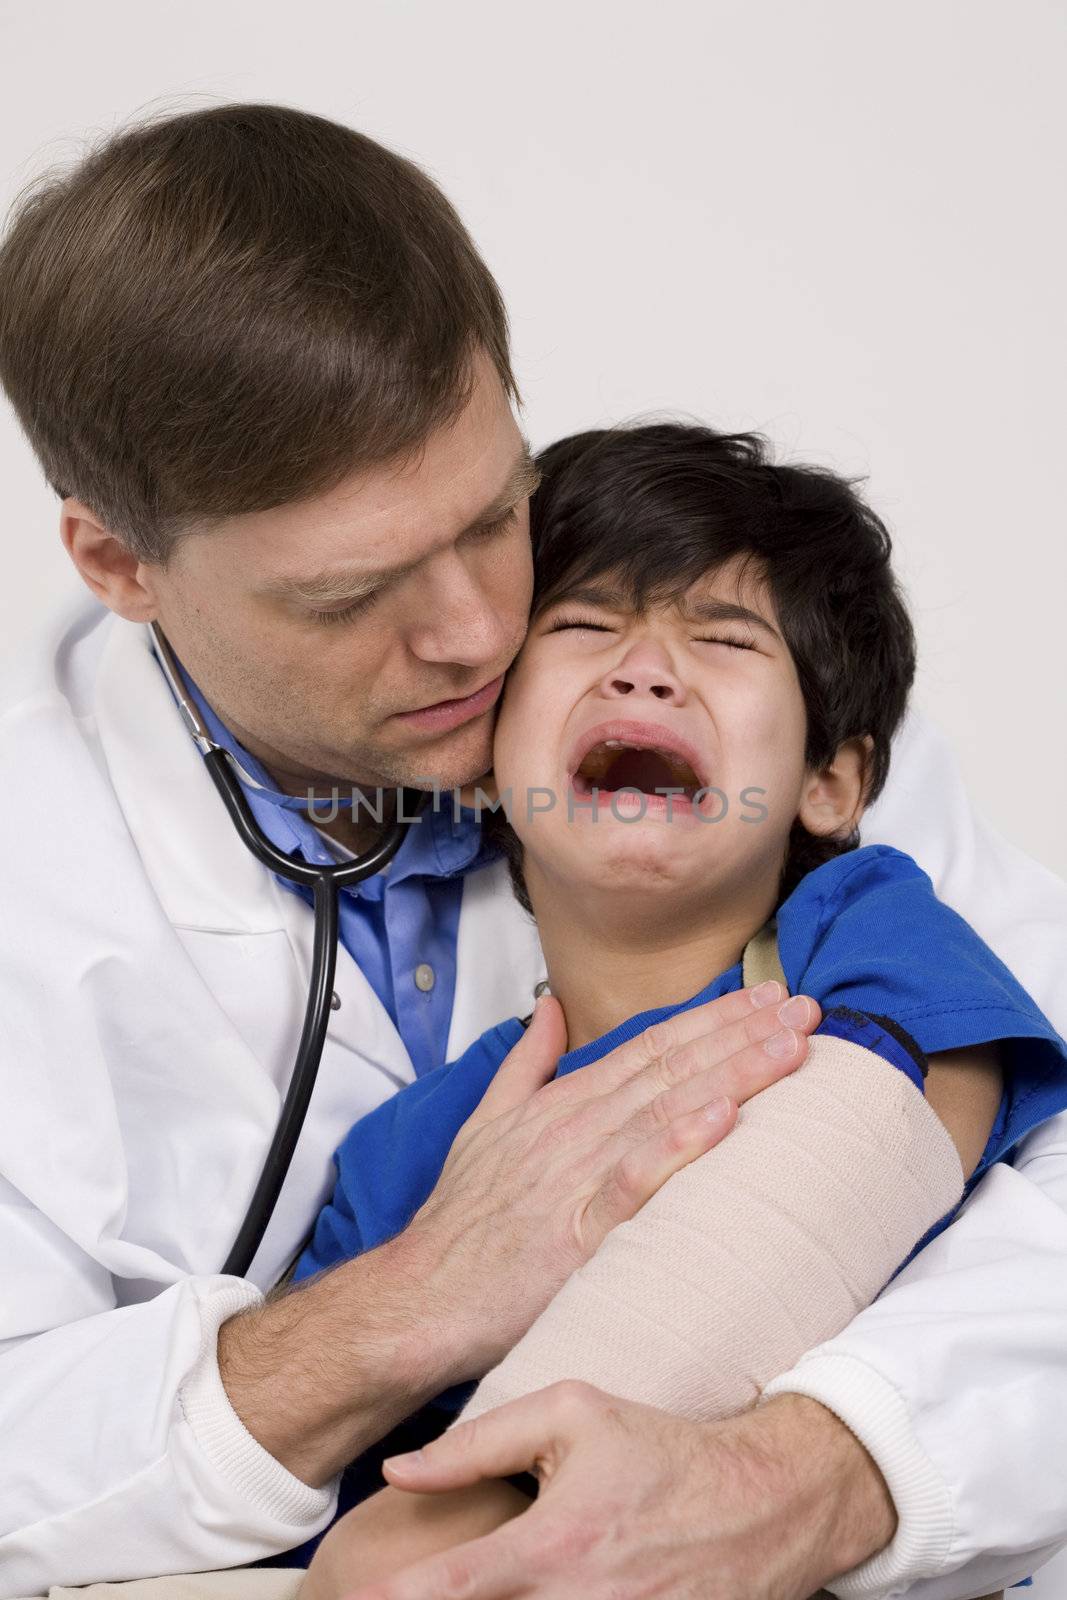 Male doctor comforting scared  toddler patient. Child is disabled with cerebral palsy. by jarenwicklund